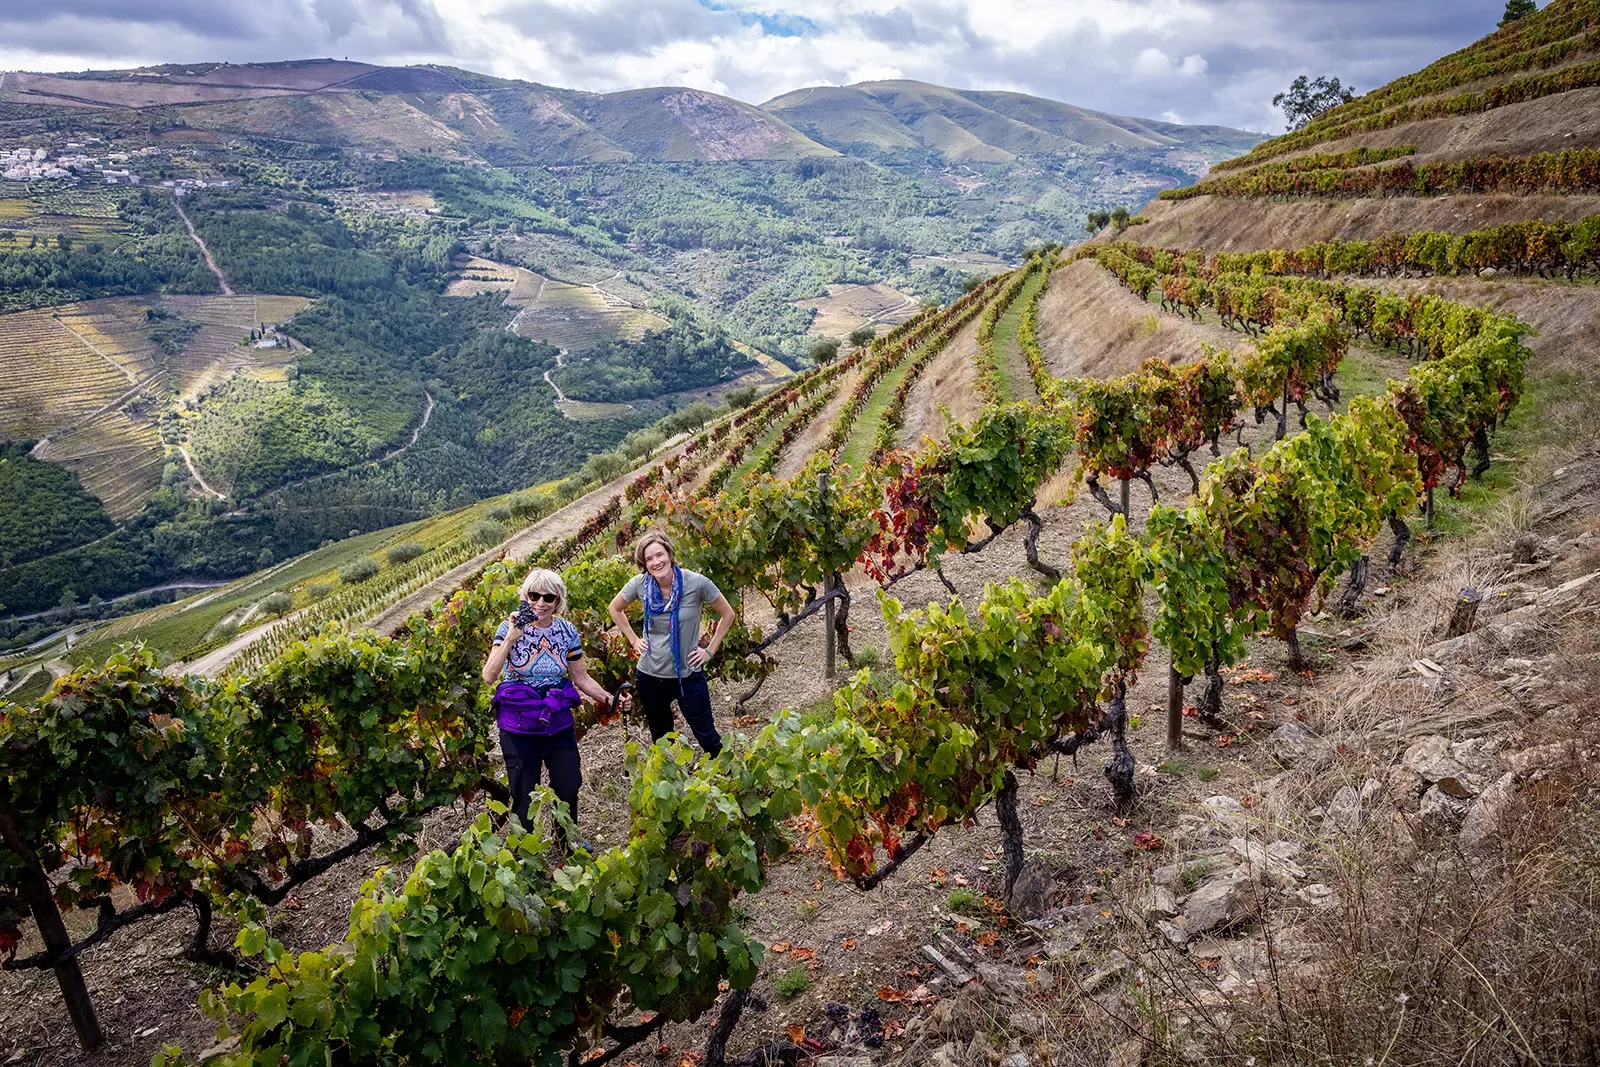 Two women posing in a vineyard on the side of a mountain